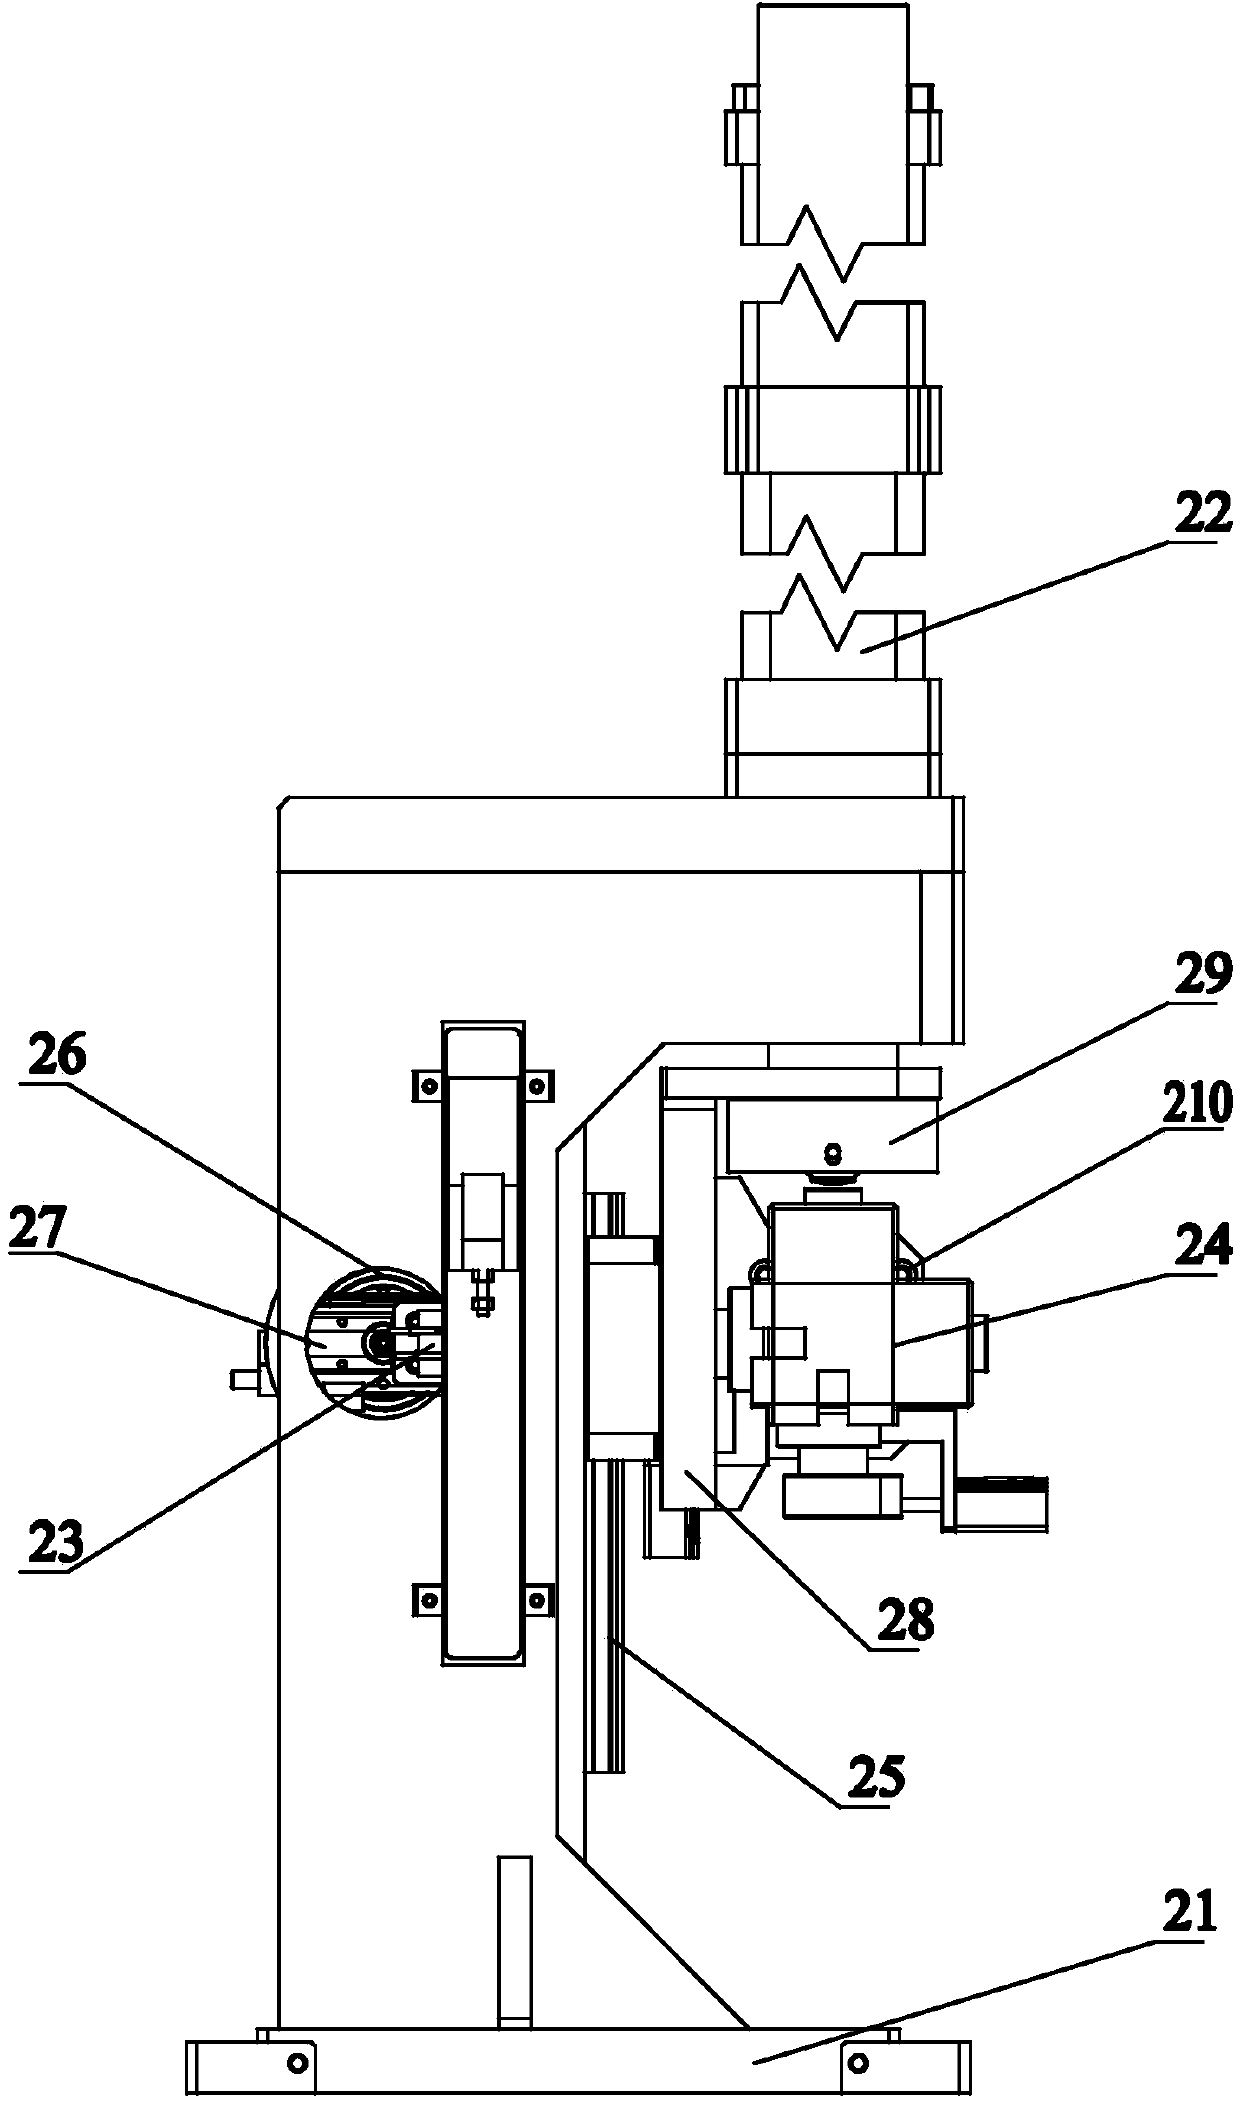 Electric tool gear assembly assembling system